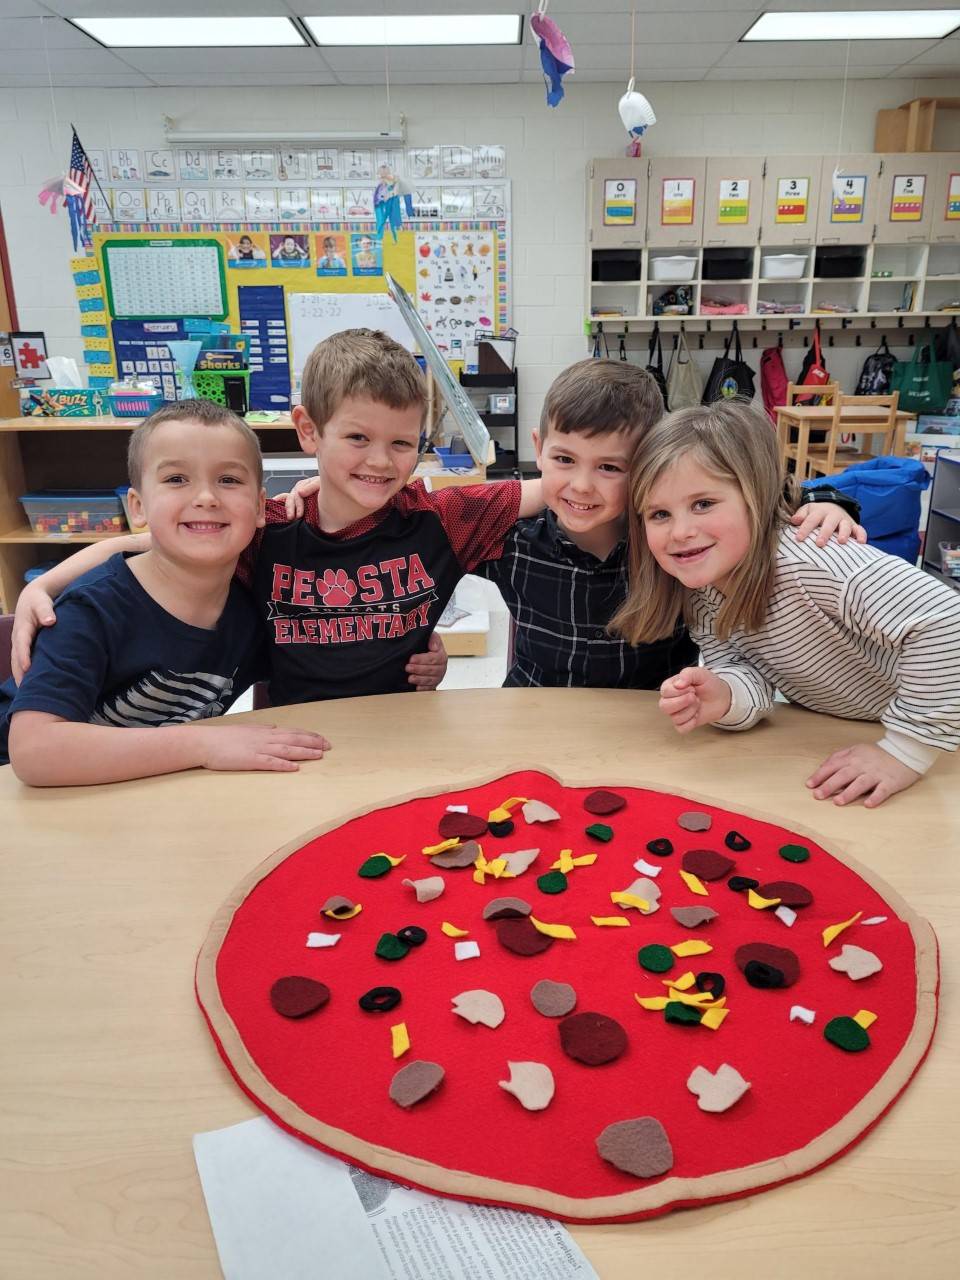 Transitional Kindergarten students working with felt pizza